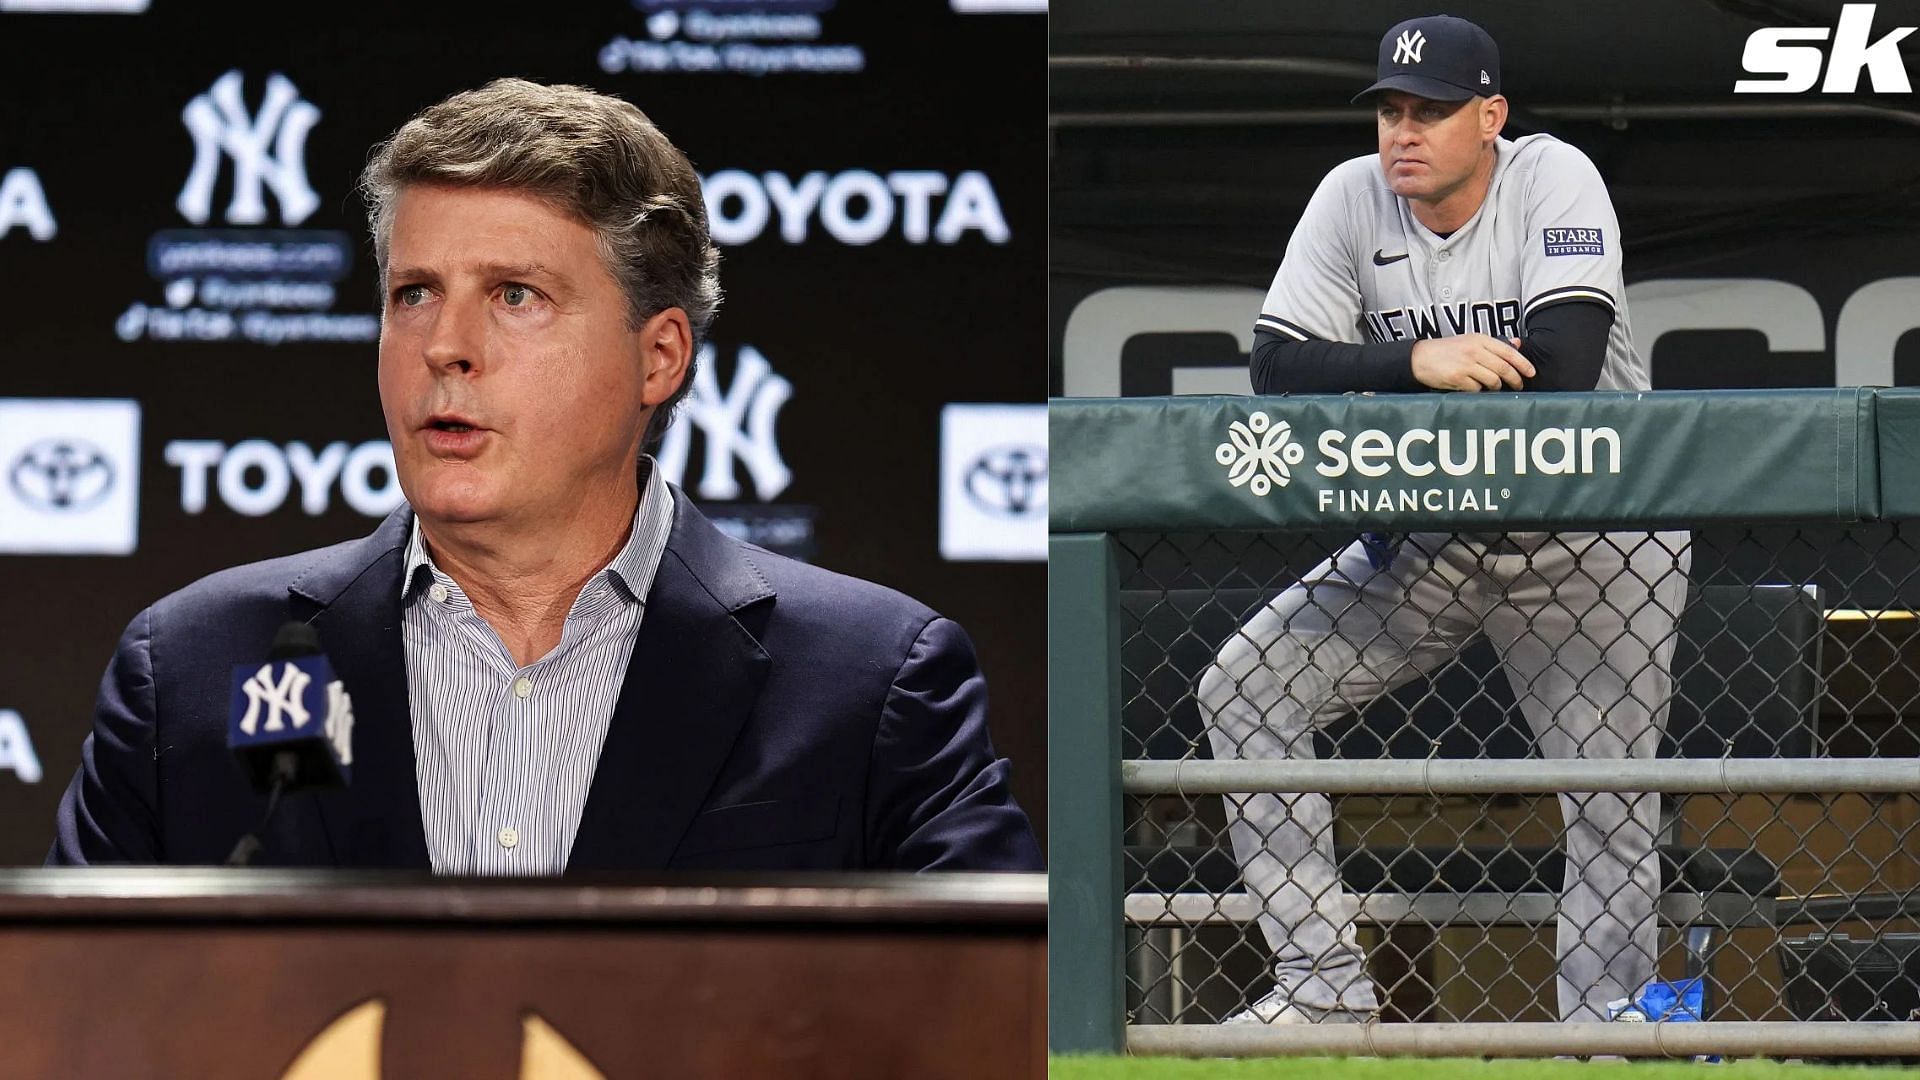 New York Yankees Hal Steinbrenner and Aaron Boone